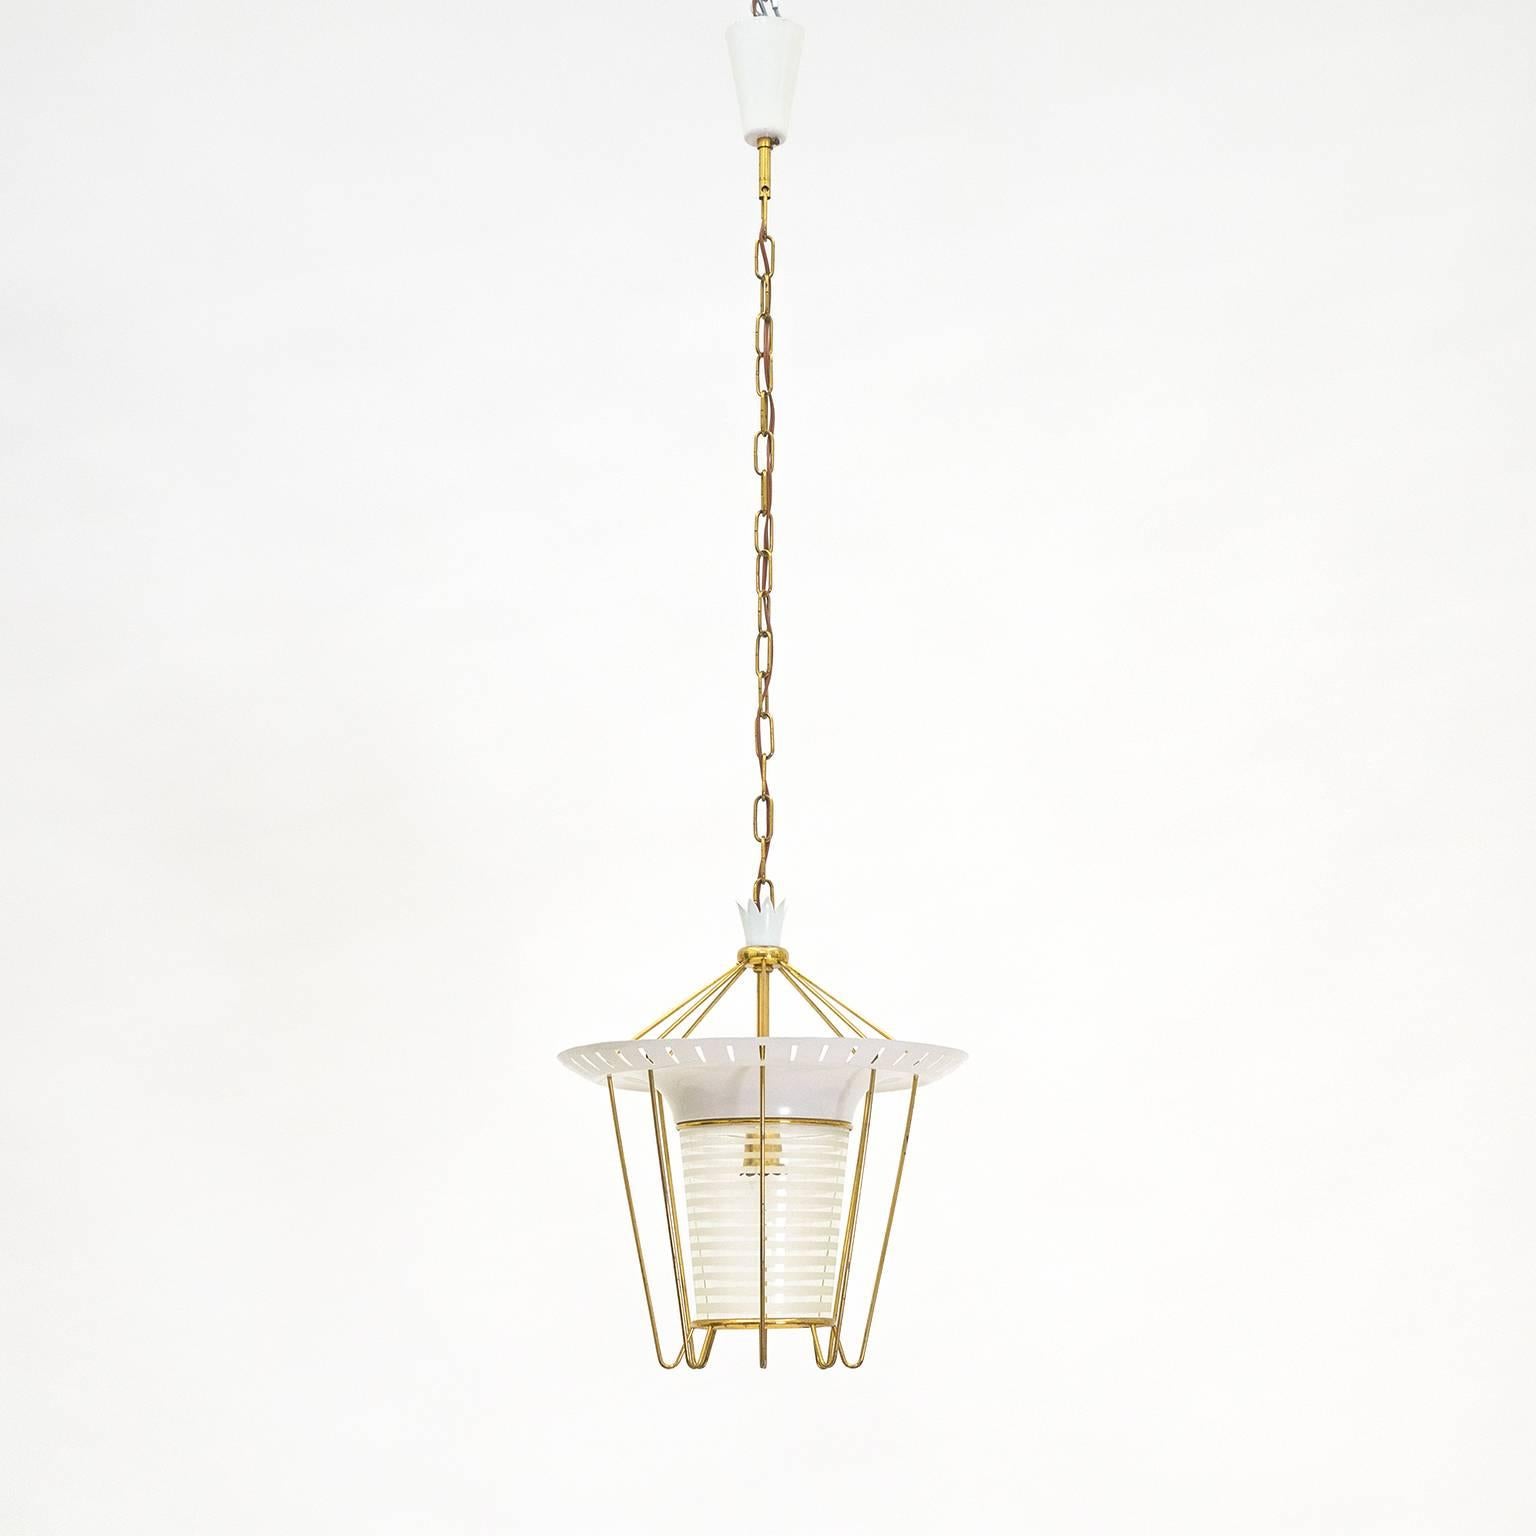 Delightful italian pendant or lantern from the 1950s with a modernist touch. White lacquered aluminum, delicate brass elements and glass with frosted stripes give this an airy mid century elegance. A charming patina on the brass and some light loss